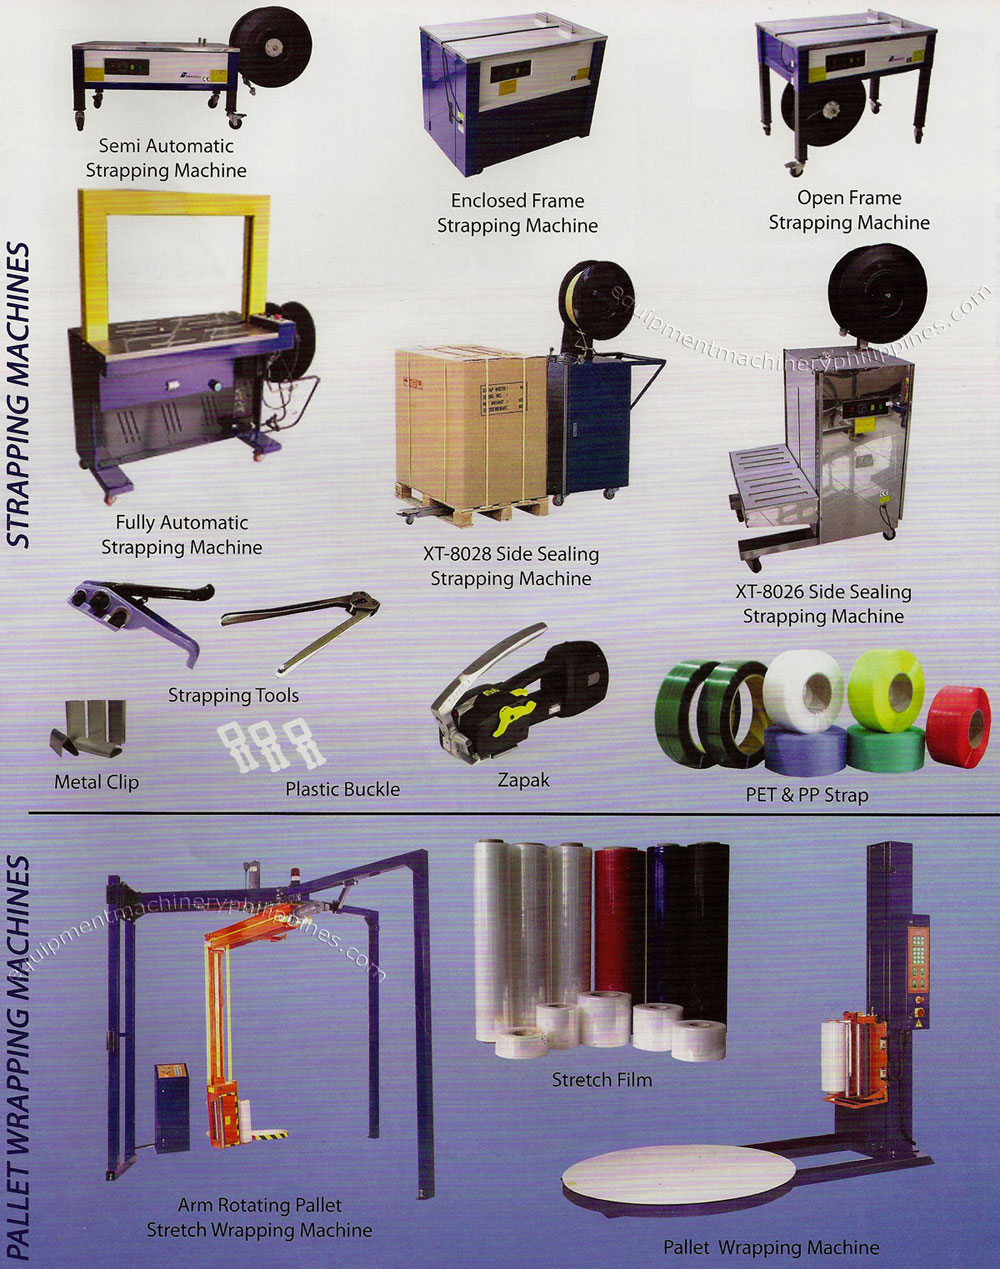 Strapping Machines, Pallet Wrapping Machines